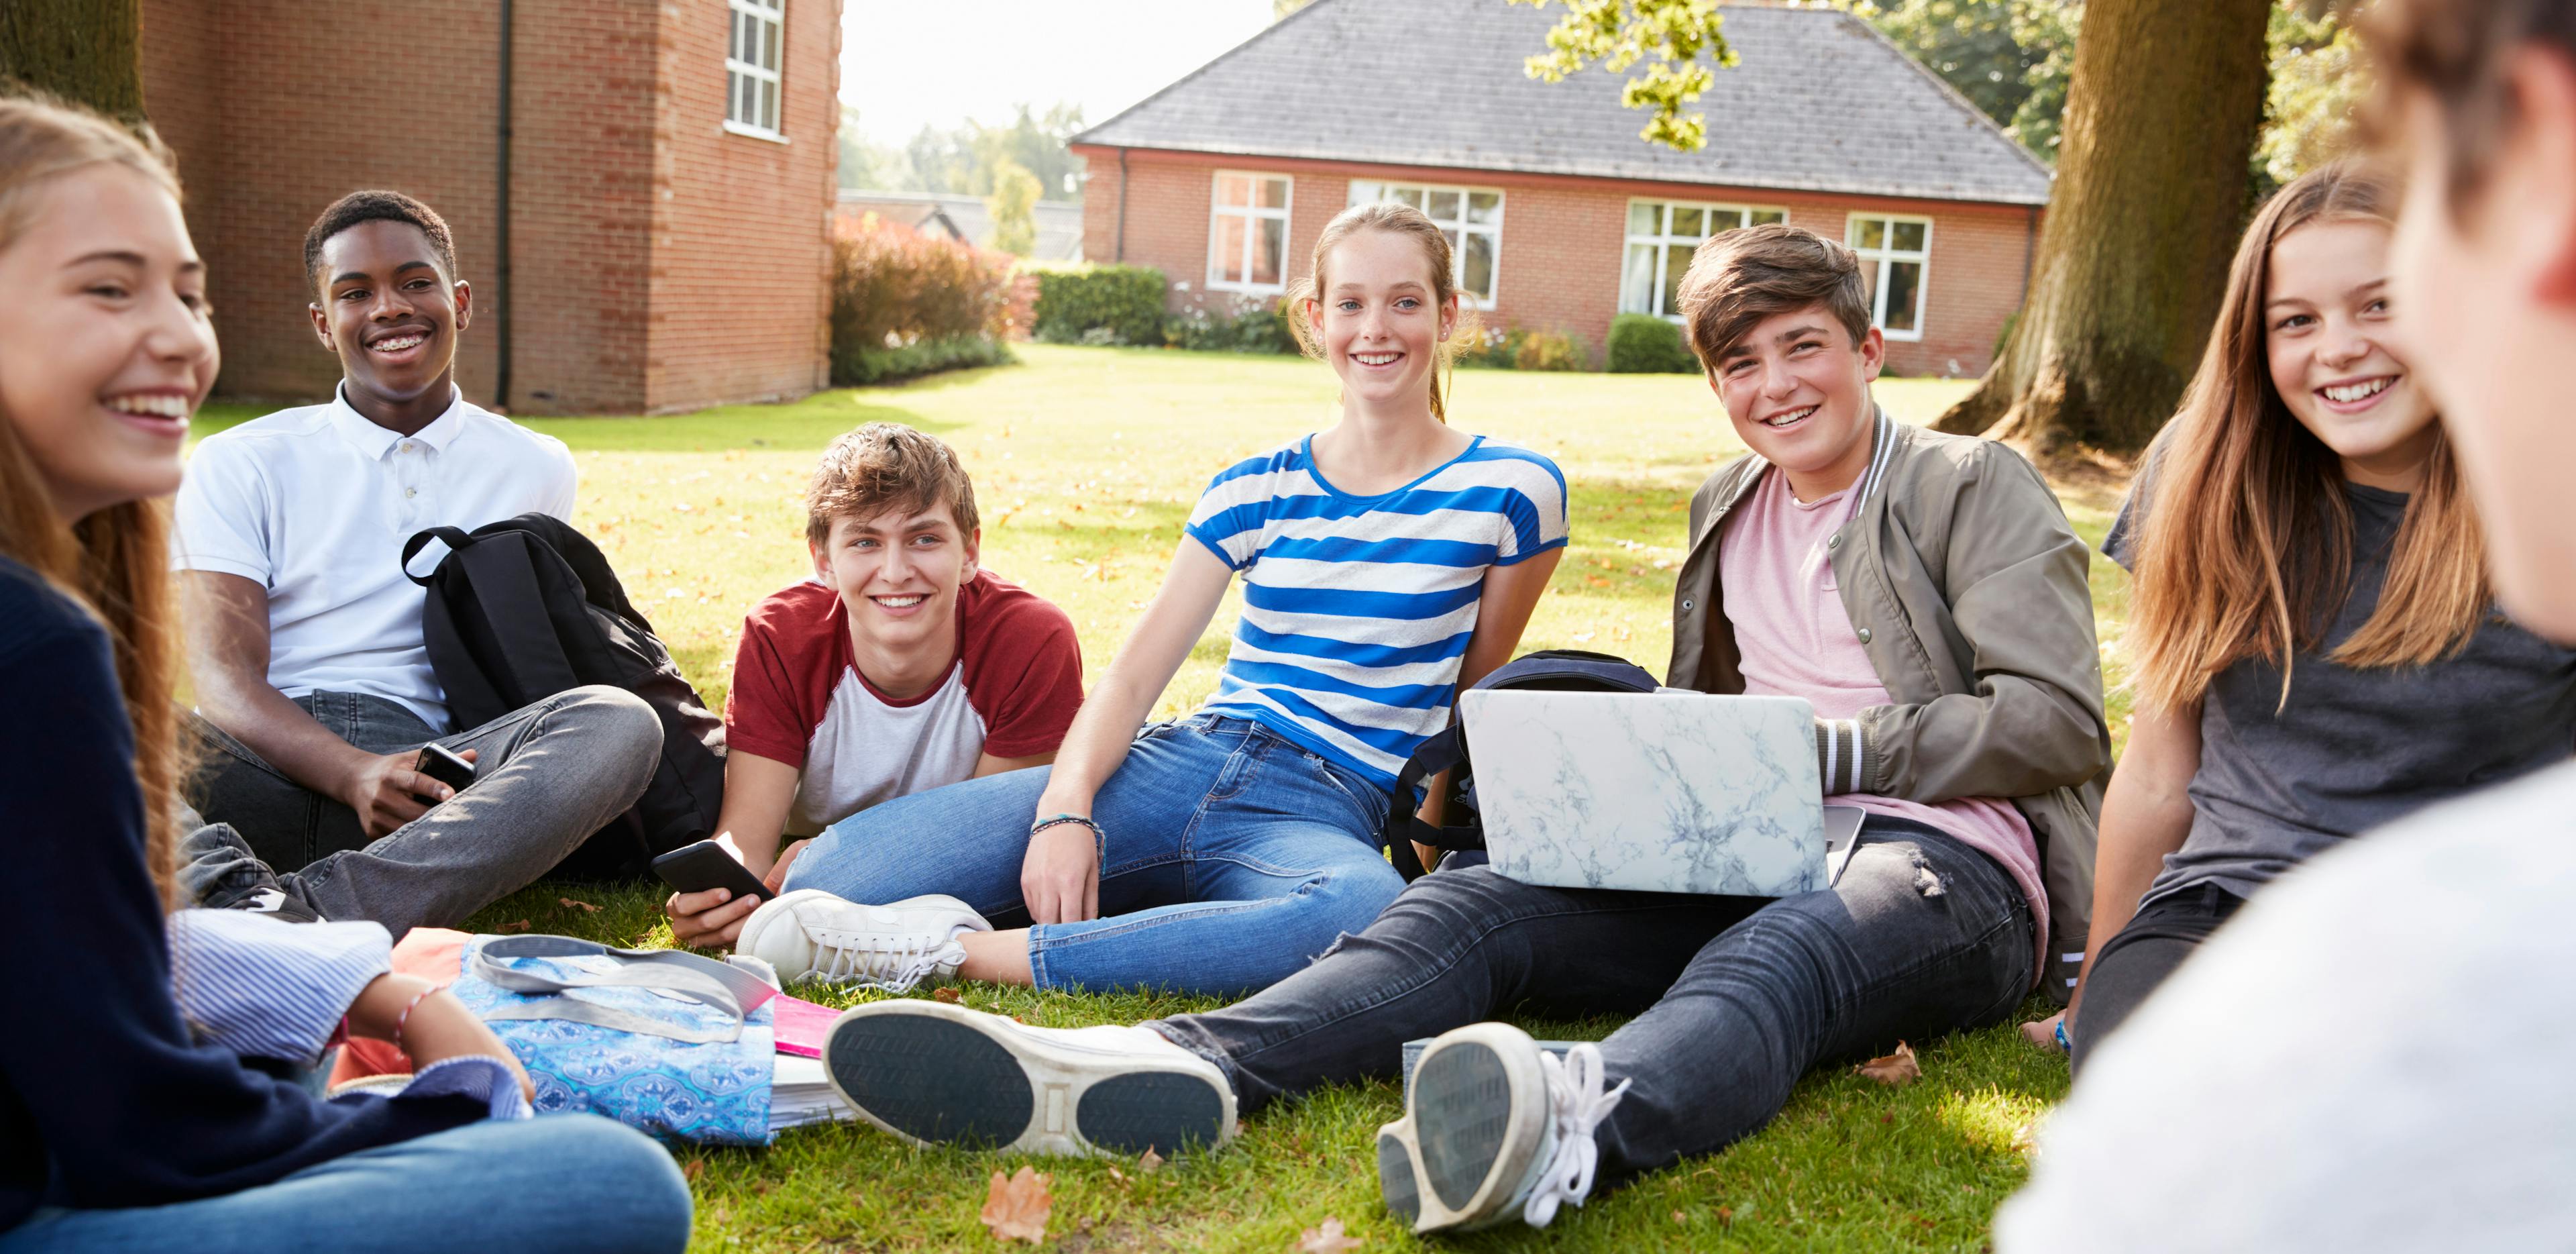 A picture of a diverse group of students sitting in a circle on the grass